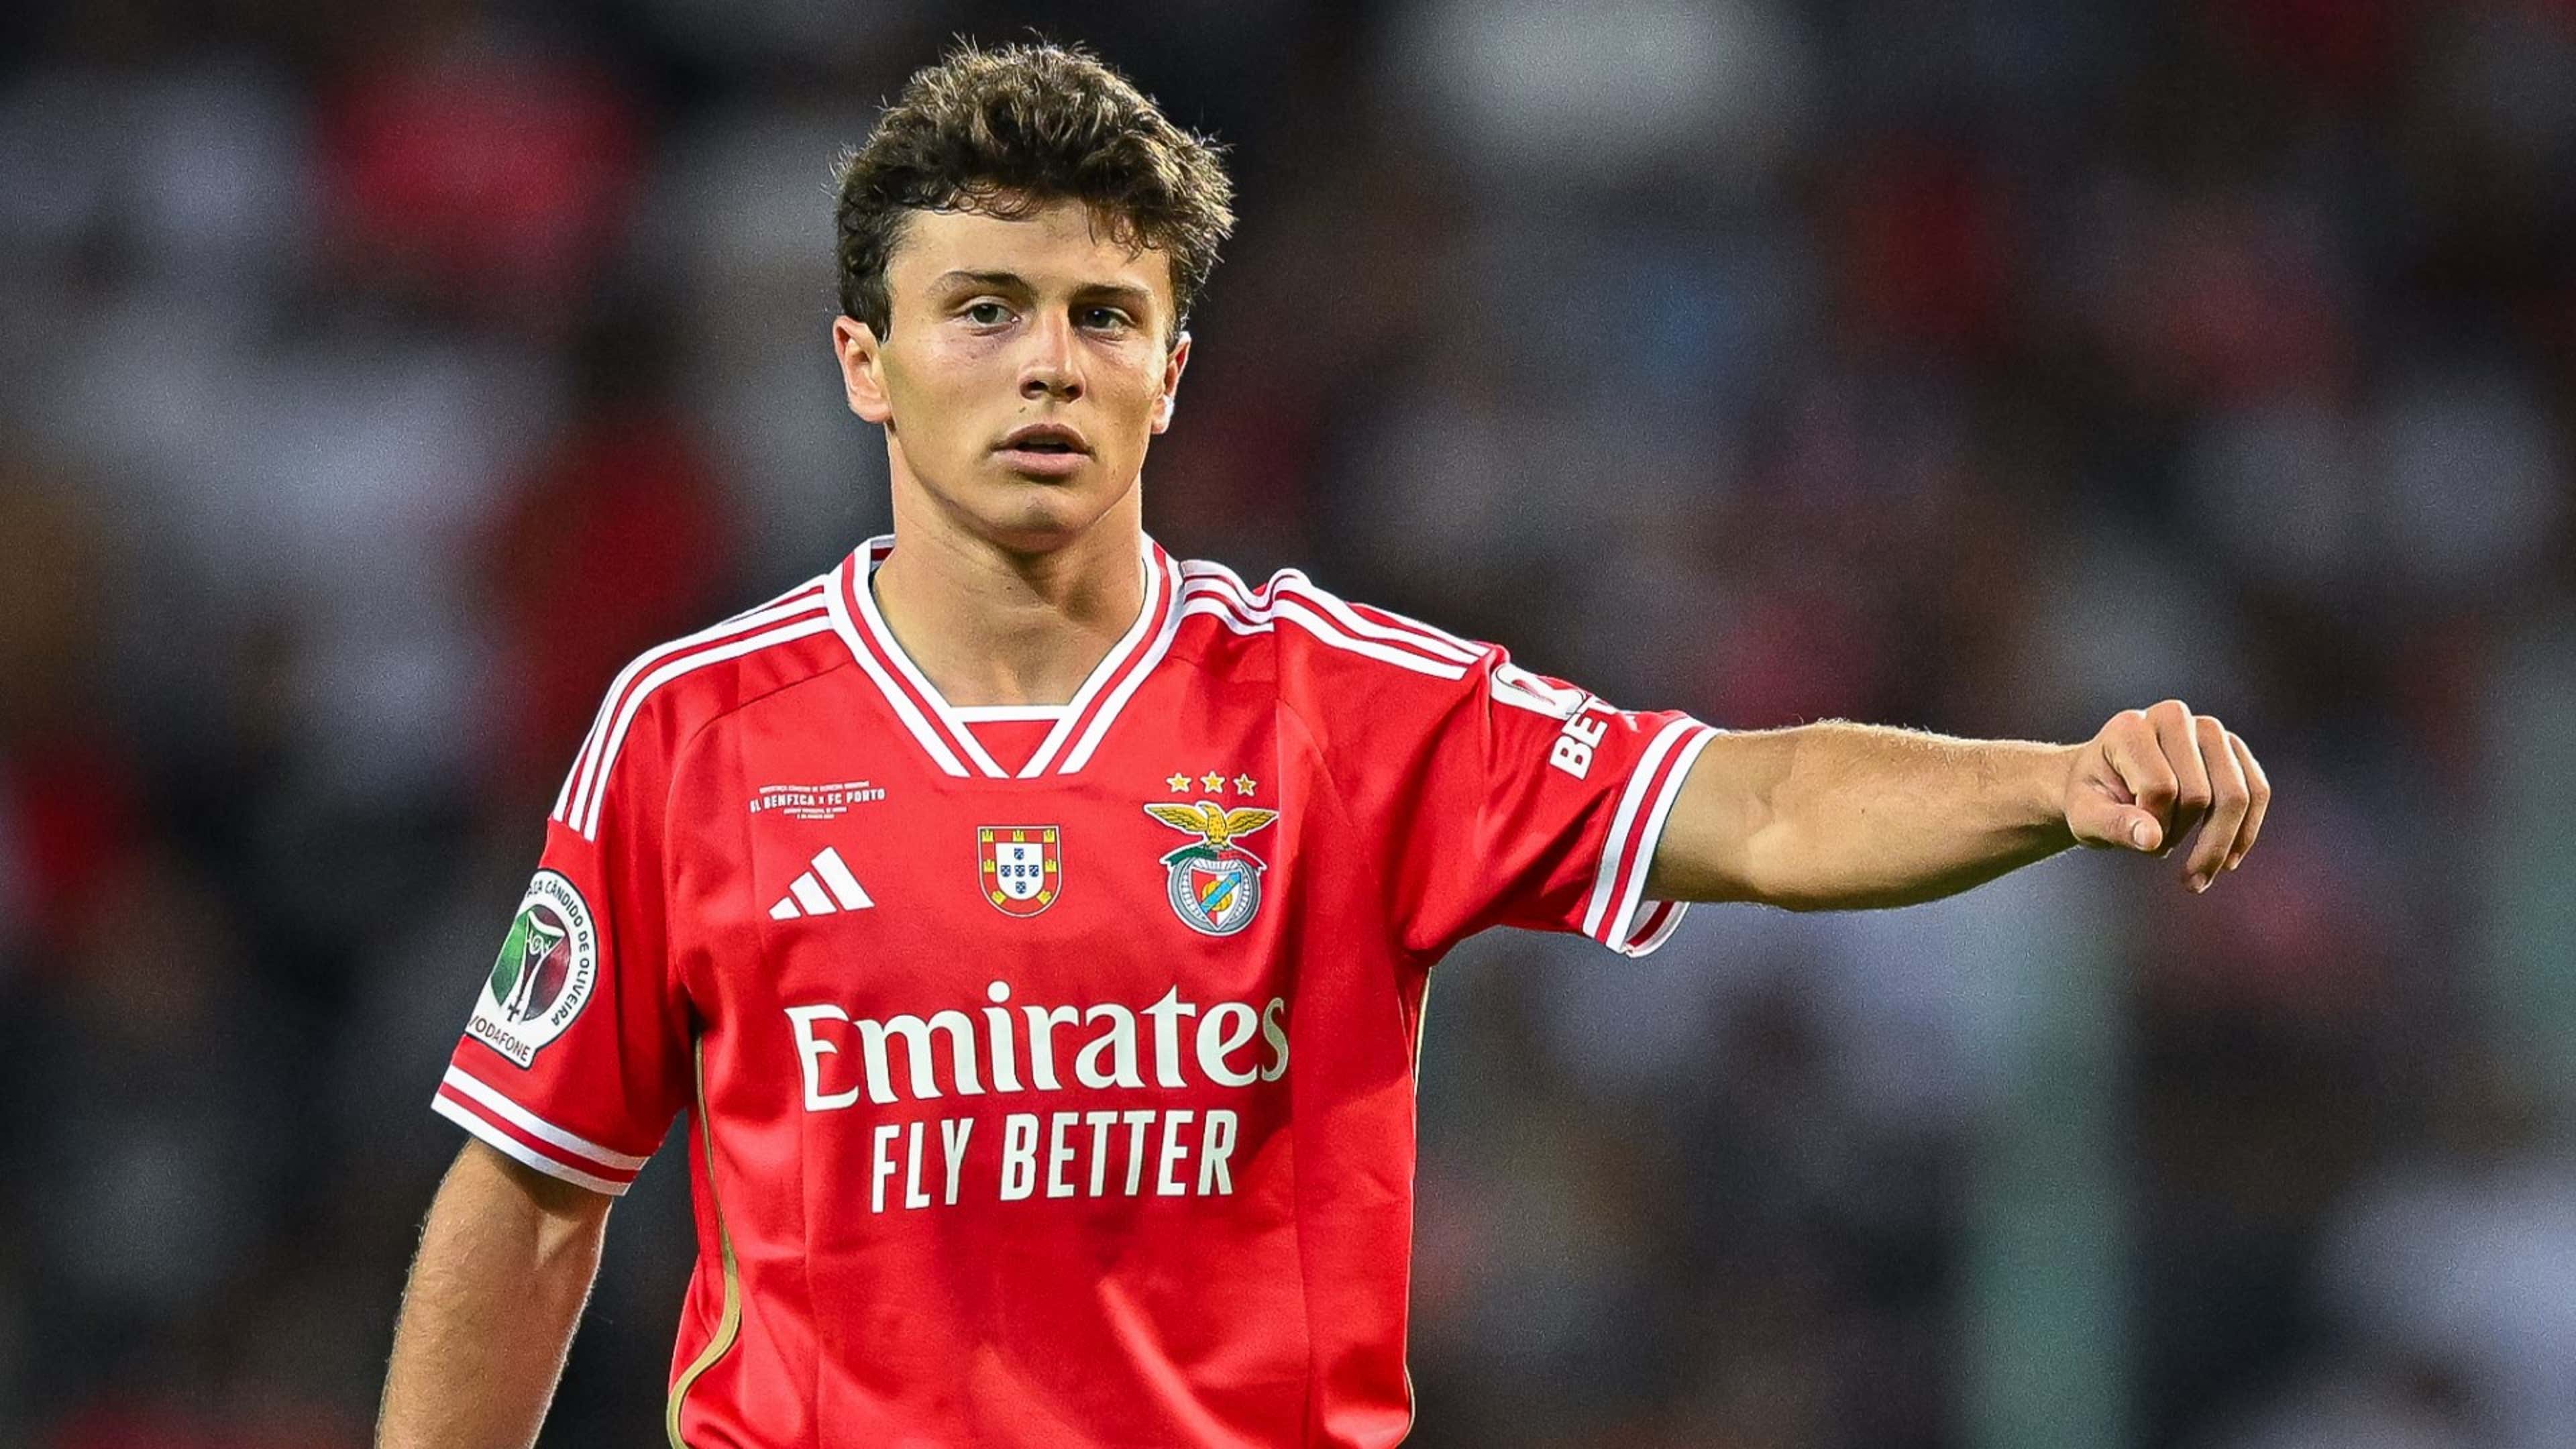 Joao Neves hints at leaving Benfica amid links with Manchester United.